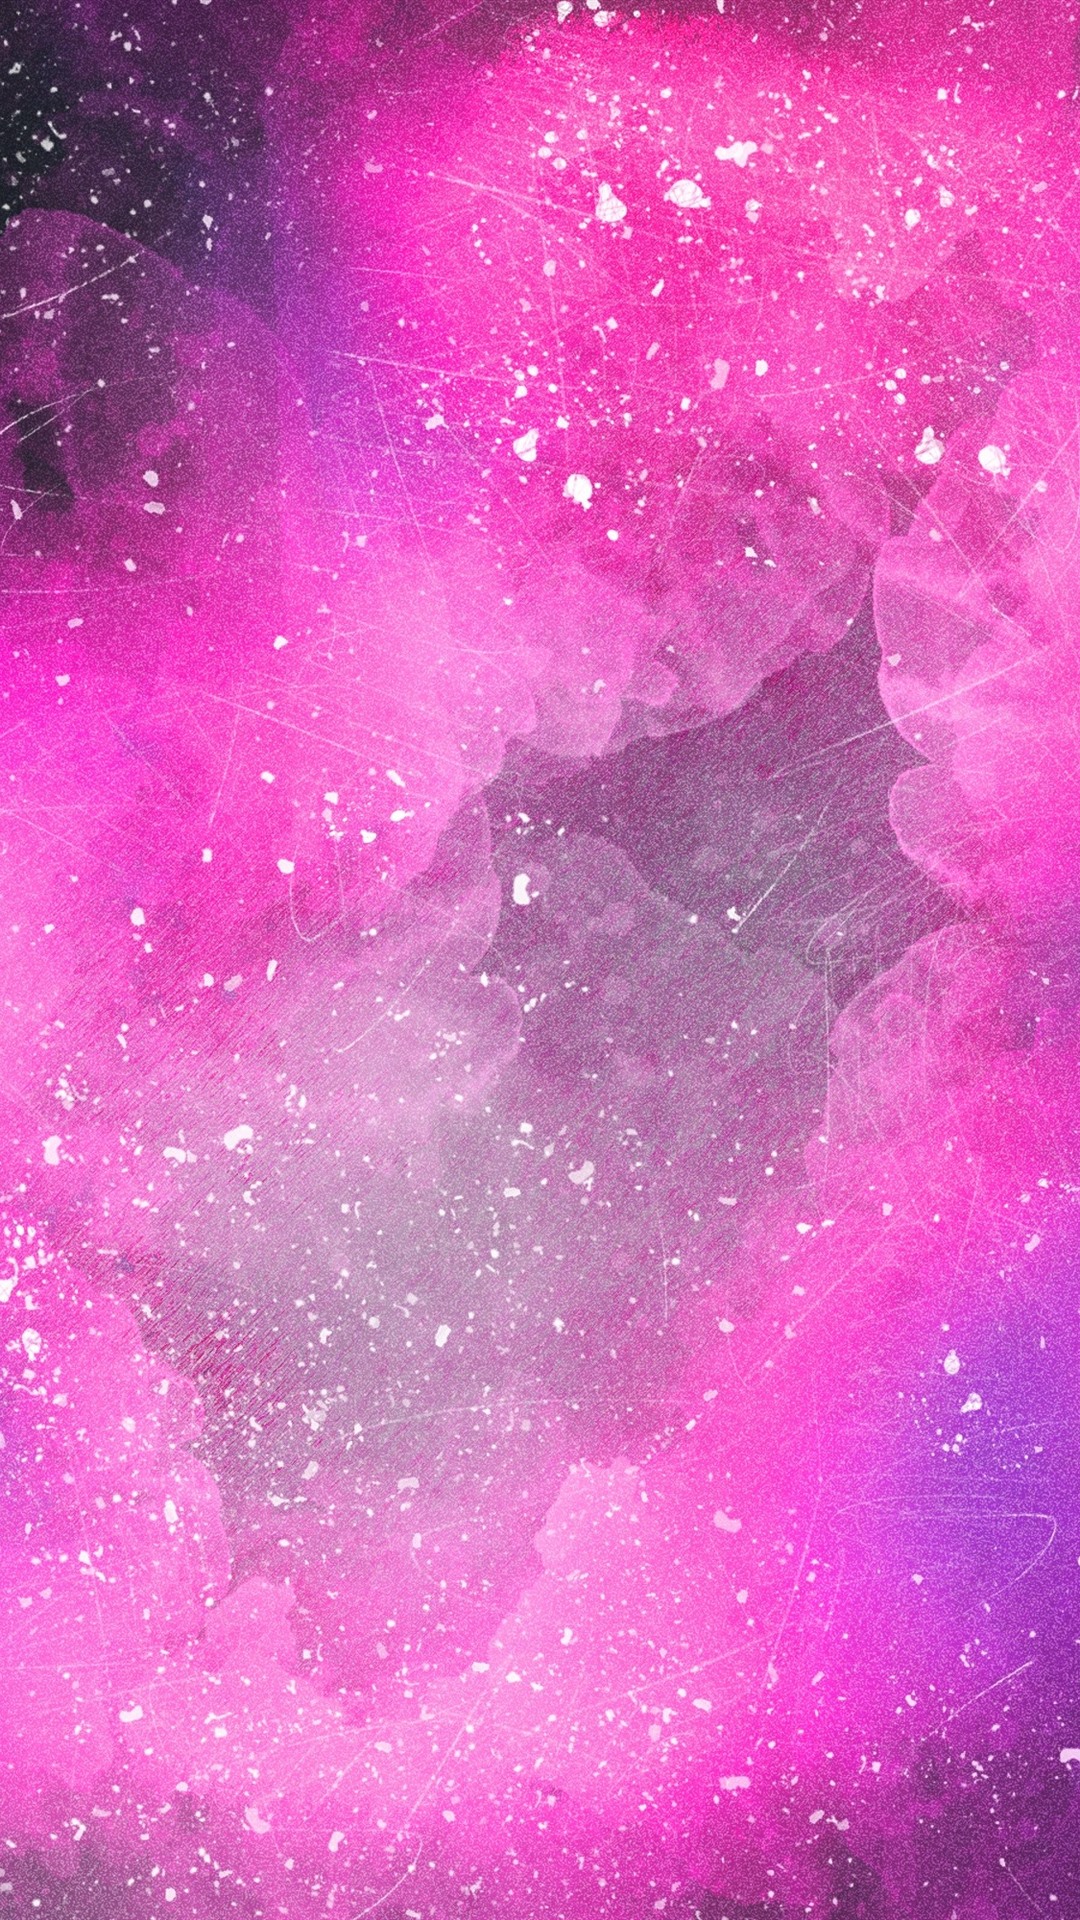 Pink Space, Clouds, Abstract 1080x1920 IPhone 8 7 6 6S Plus Wallpaper, Background, Picture, Image